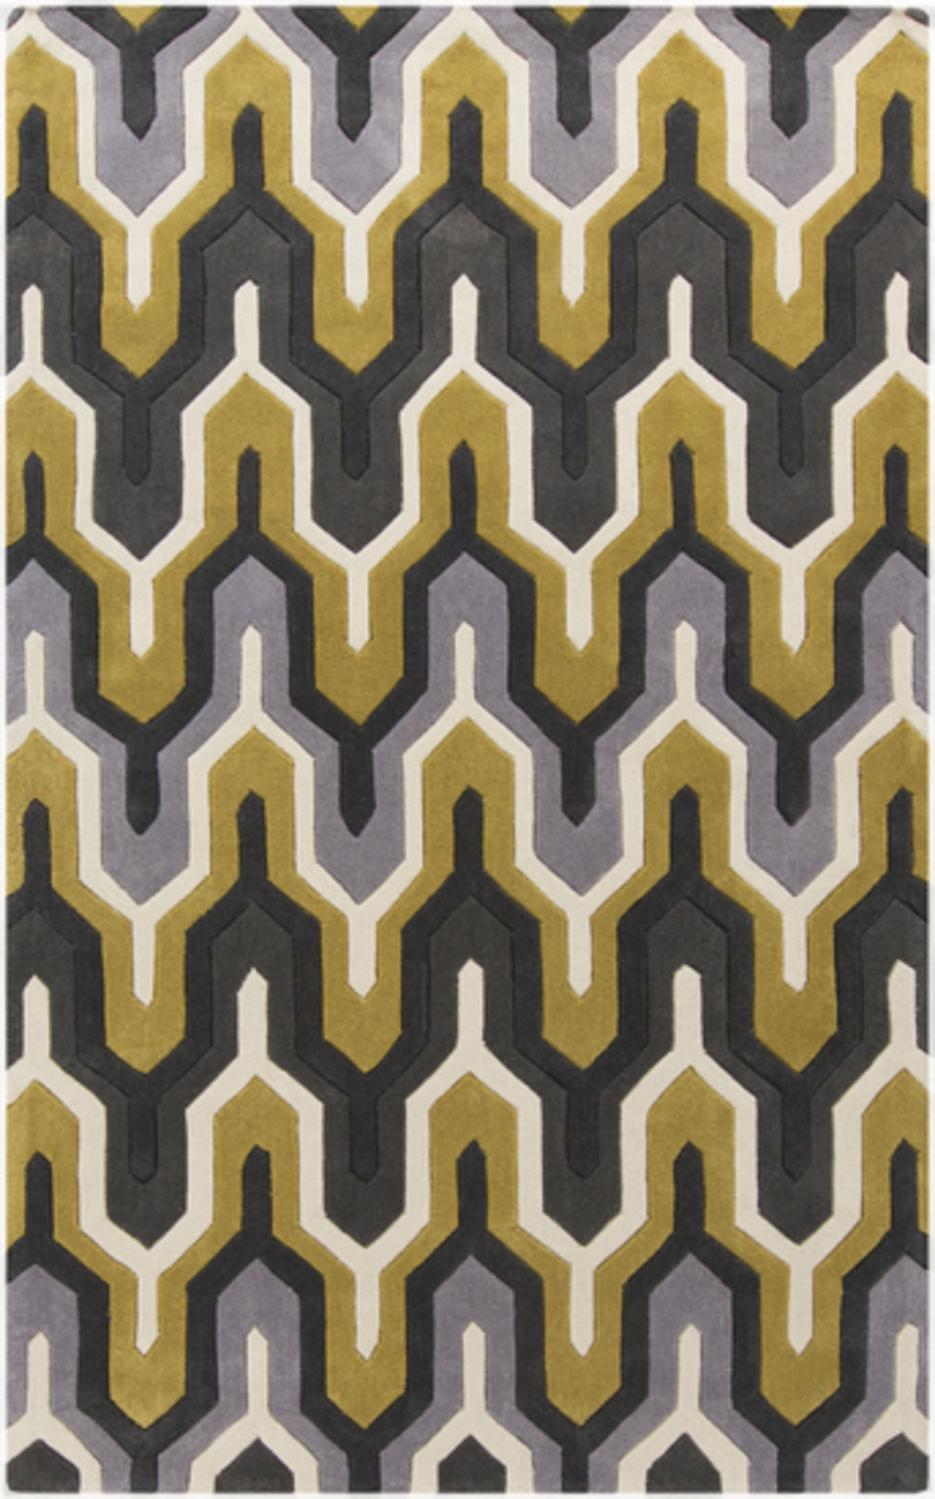 Diva At Home 9' x 13' Egyptian Tefnut Mustard Yellow and Gray Hand Tufted Area Throw Rug